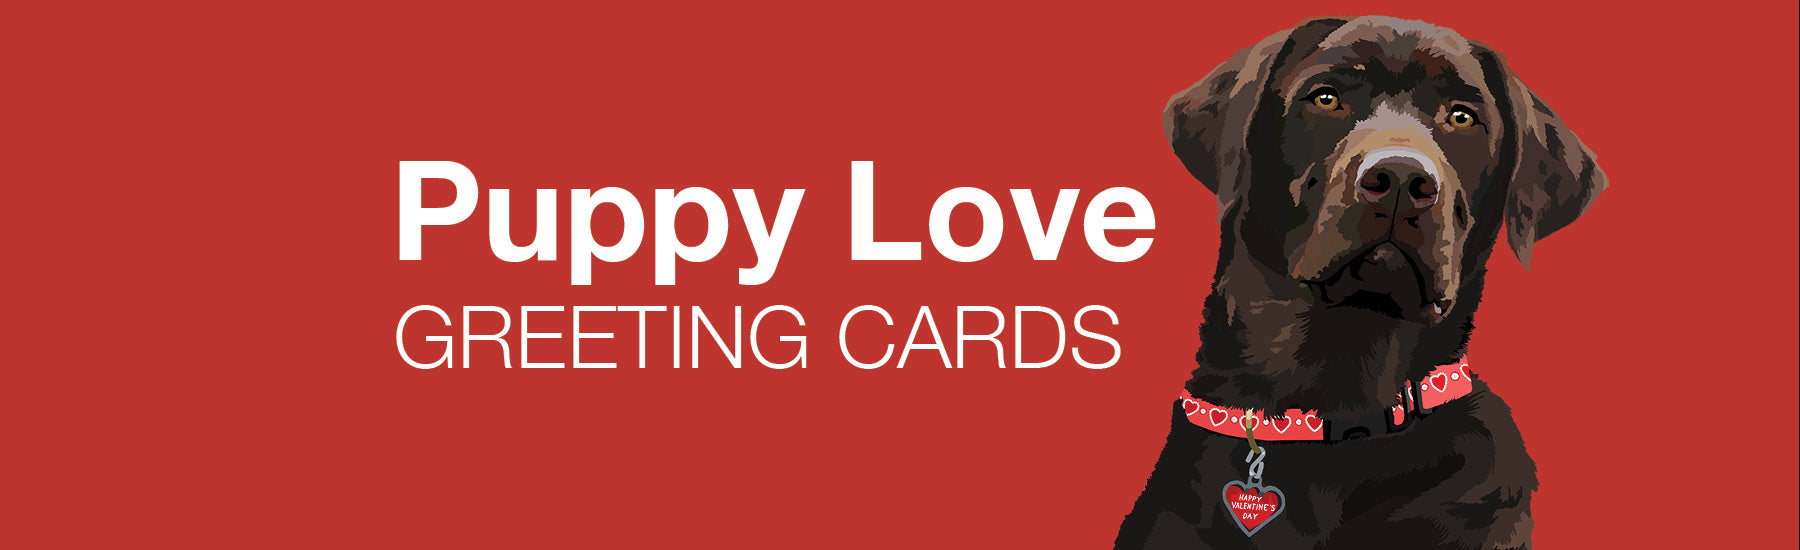 PUPPY LOVE GREETING CARDS